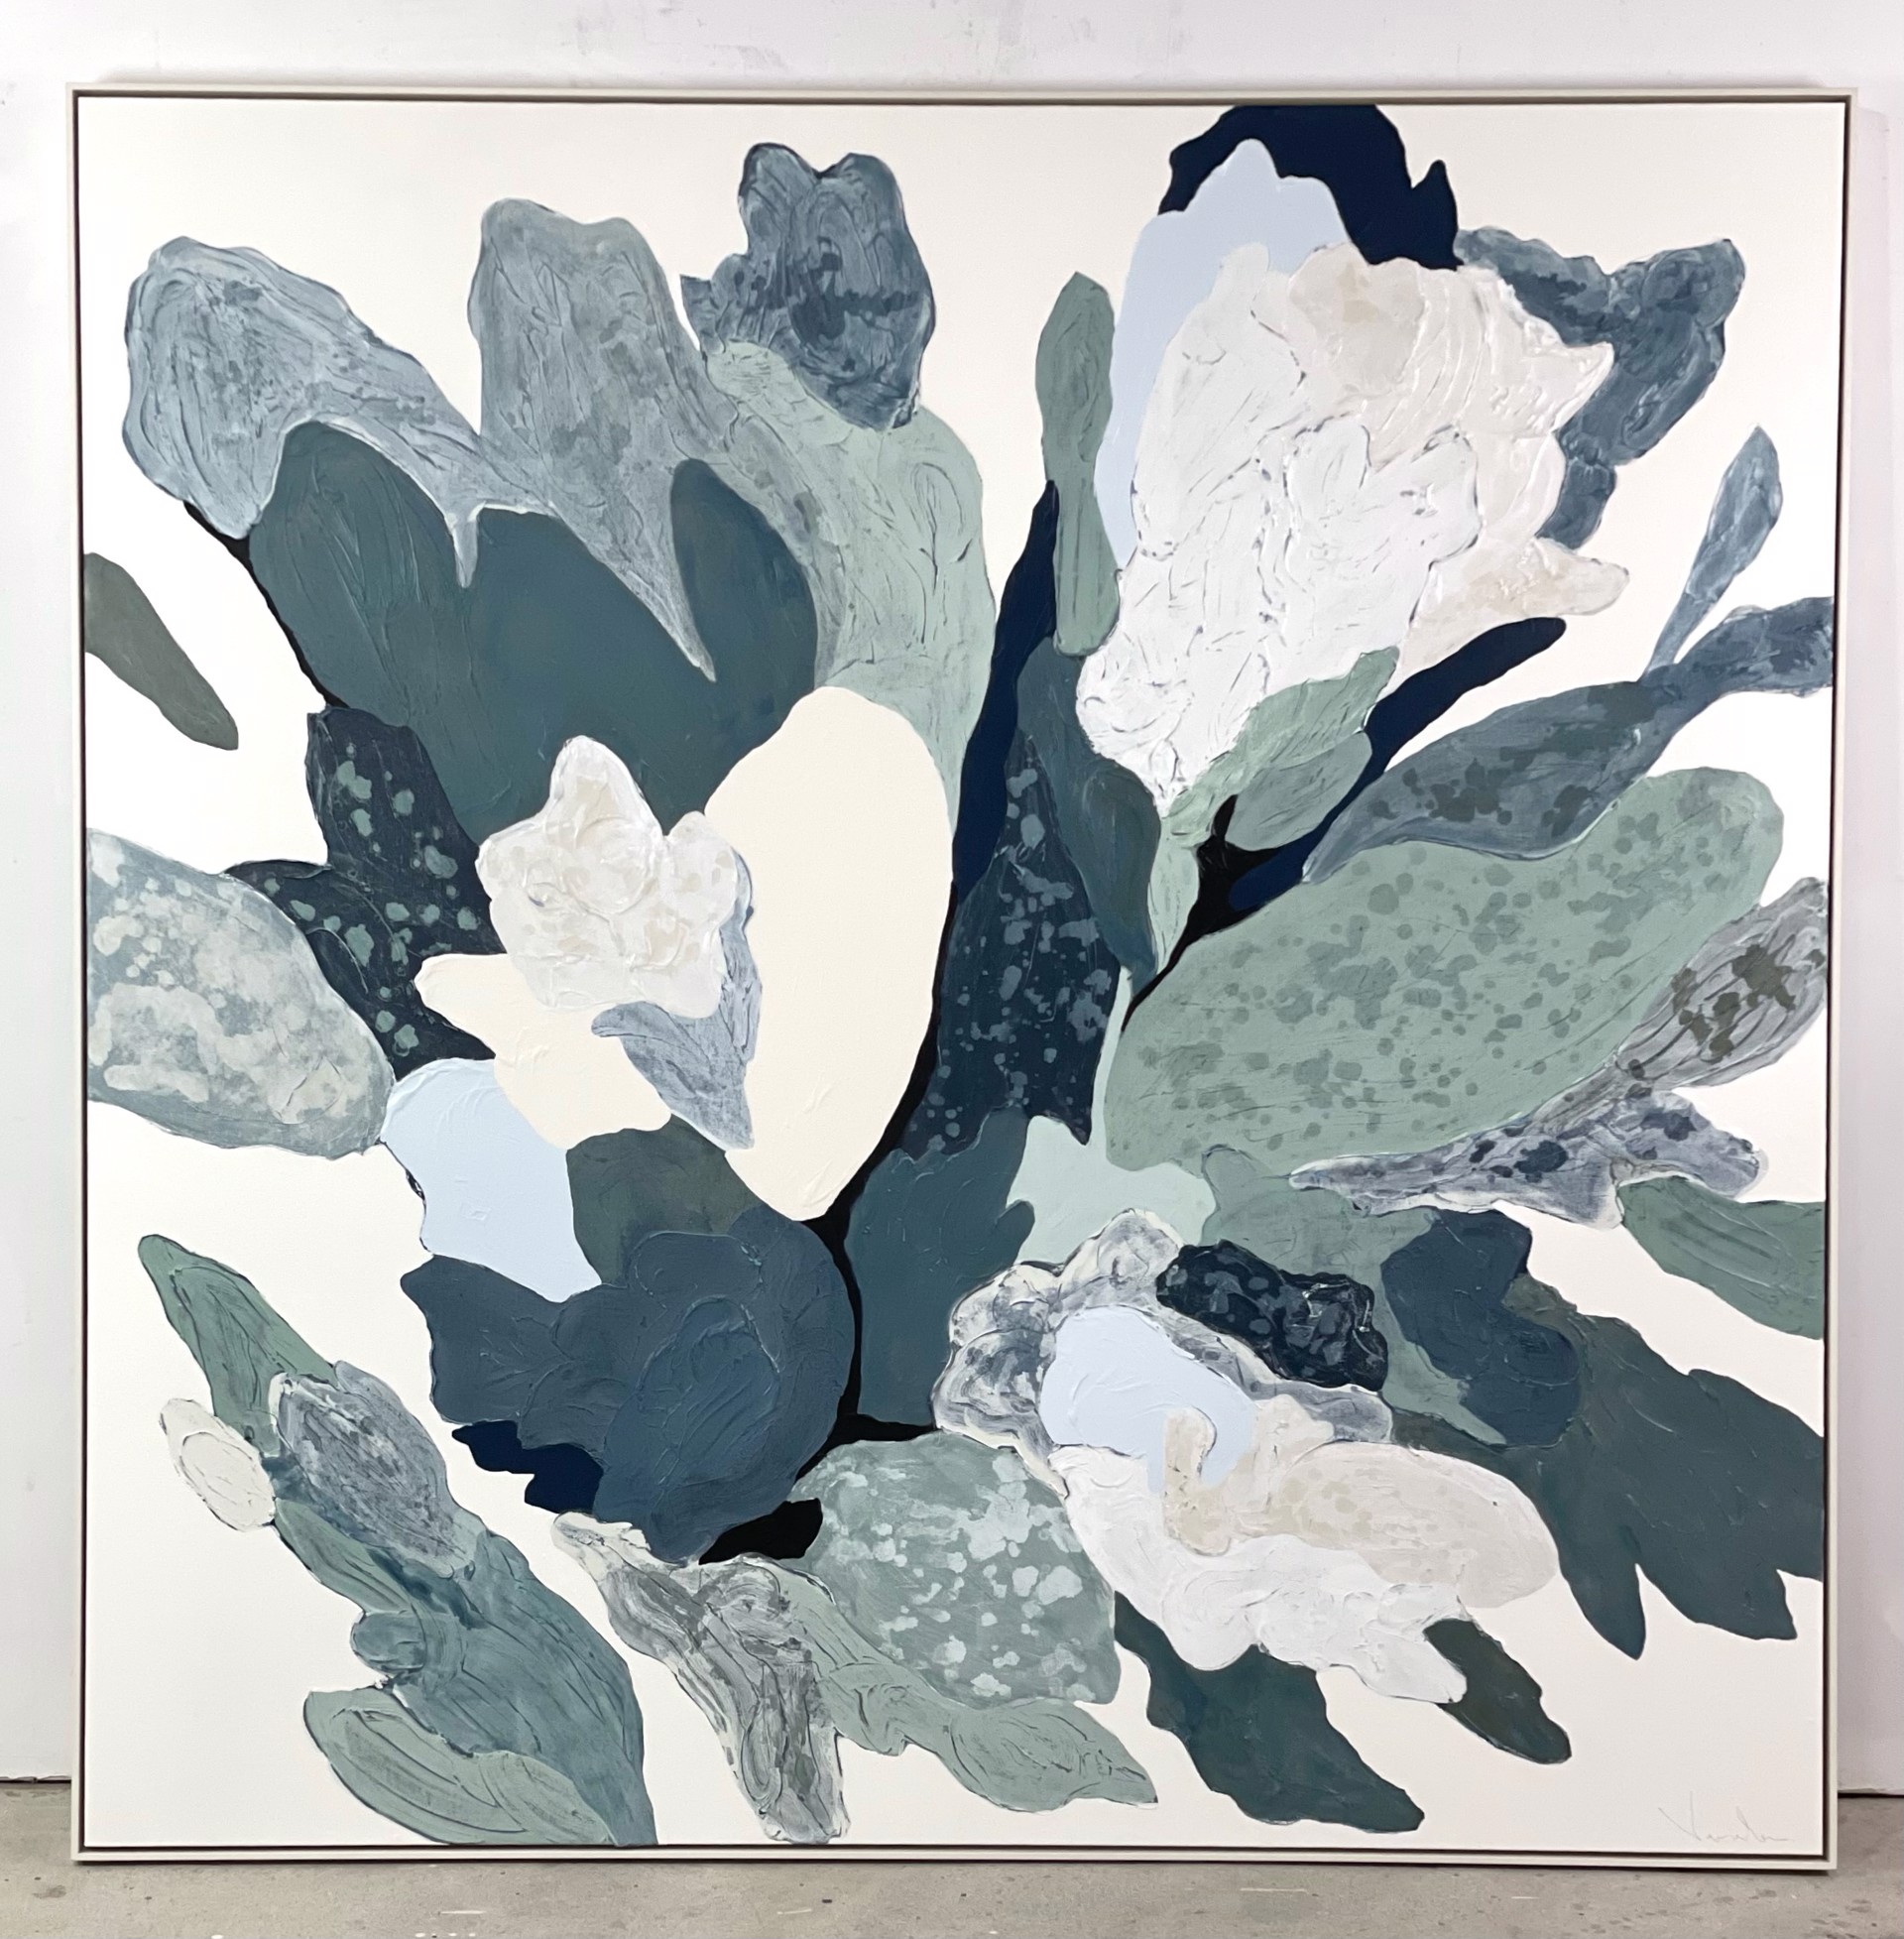 Vesela Baker's large scale textured abstract painting As The Sea I